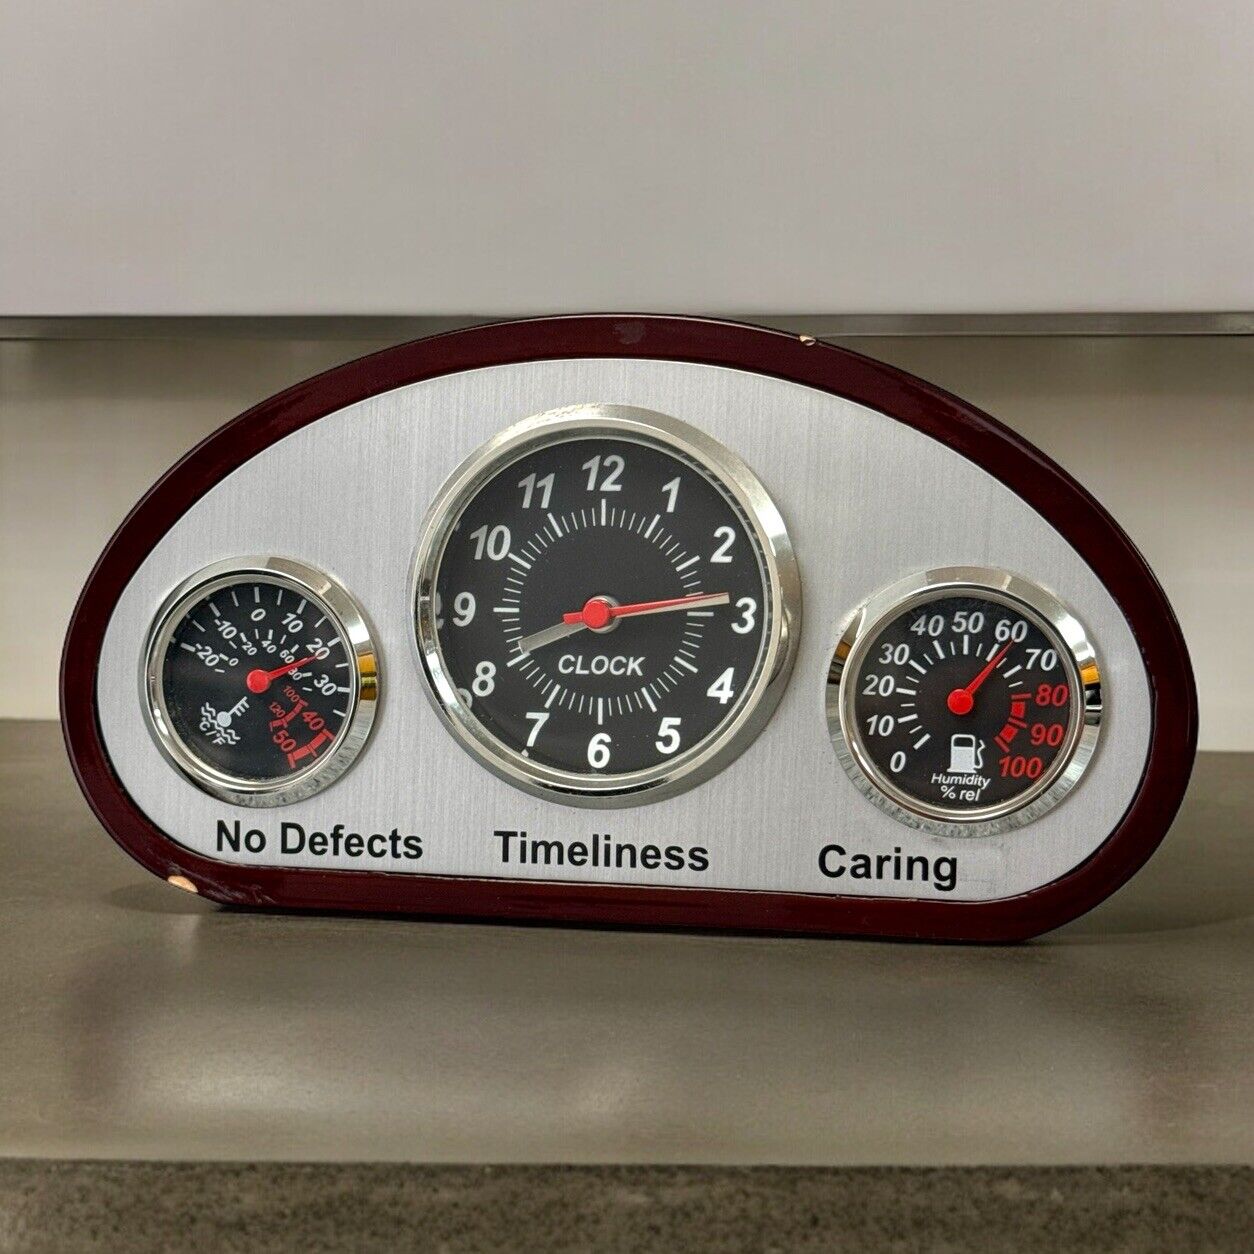 Toyota Promotional Desk Clock Very Rare Humidity Temperature Combo Flaws Vintage